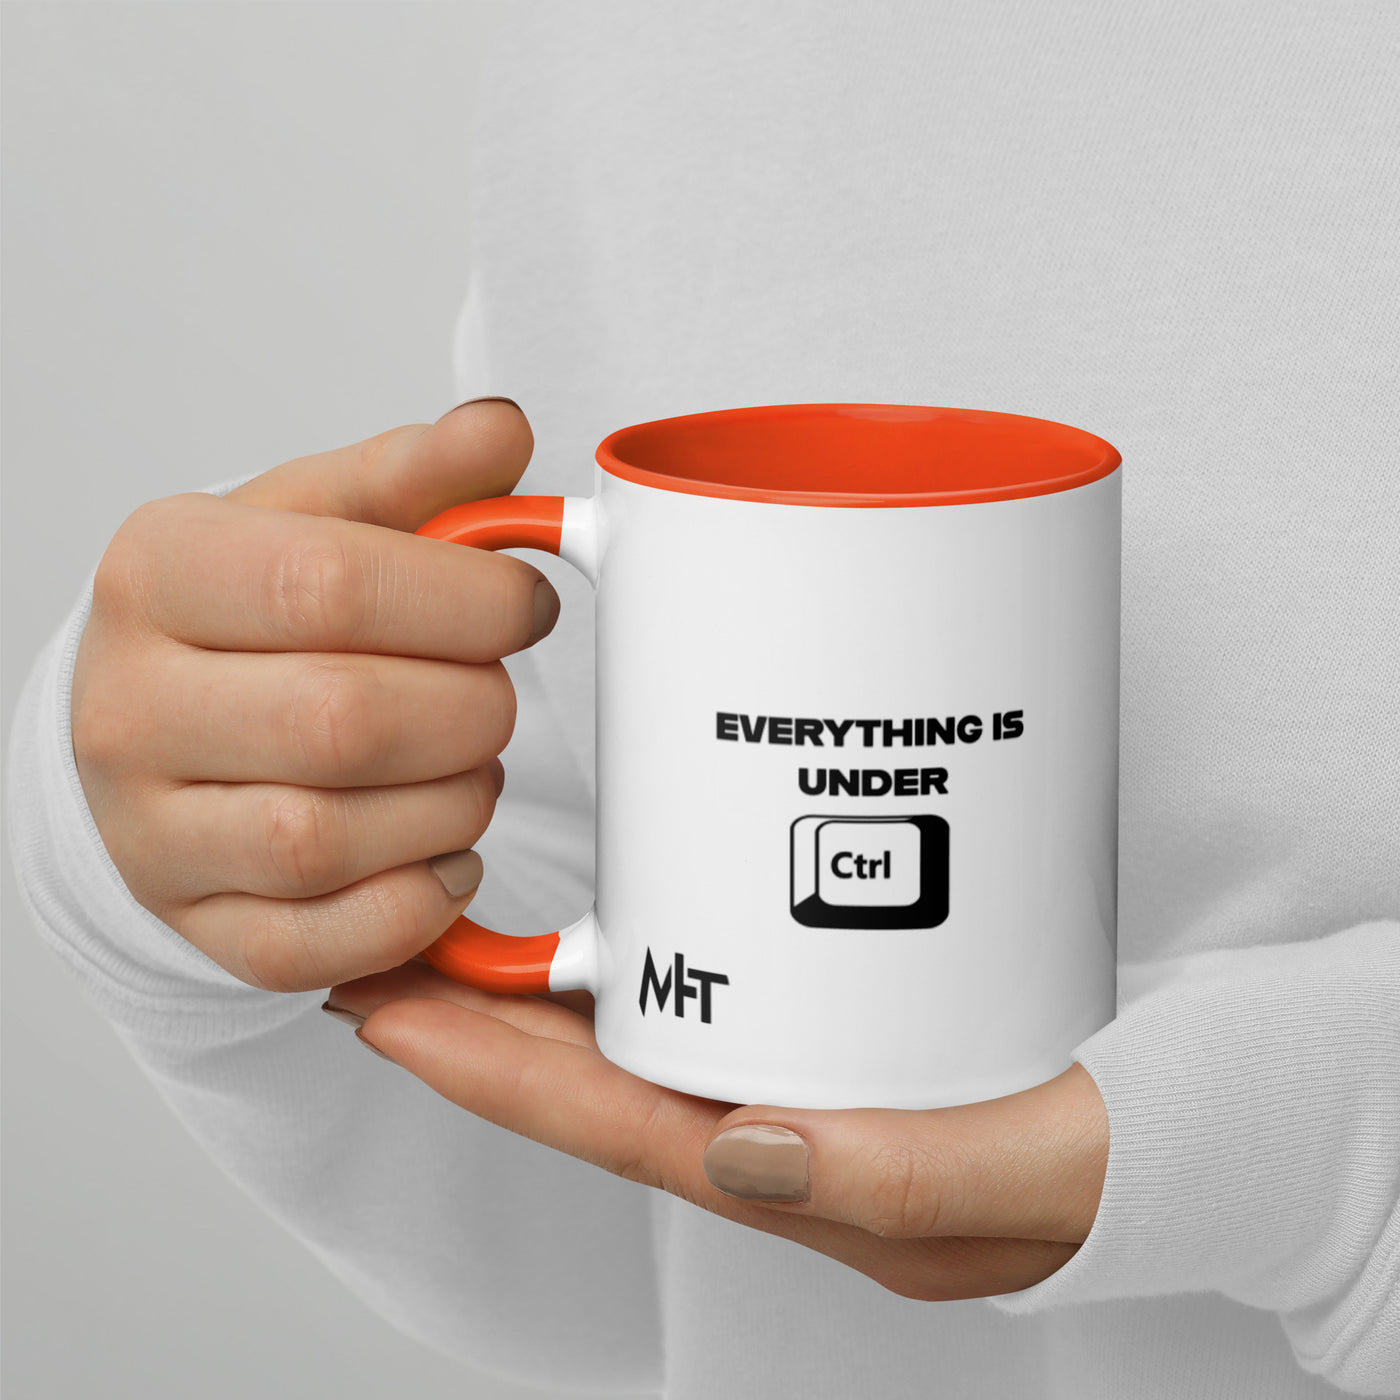 Everything is under Ctrl - Mug with Color Inside